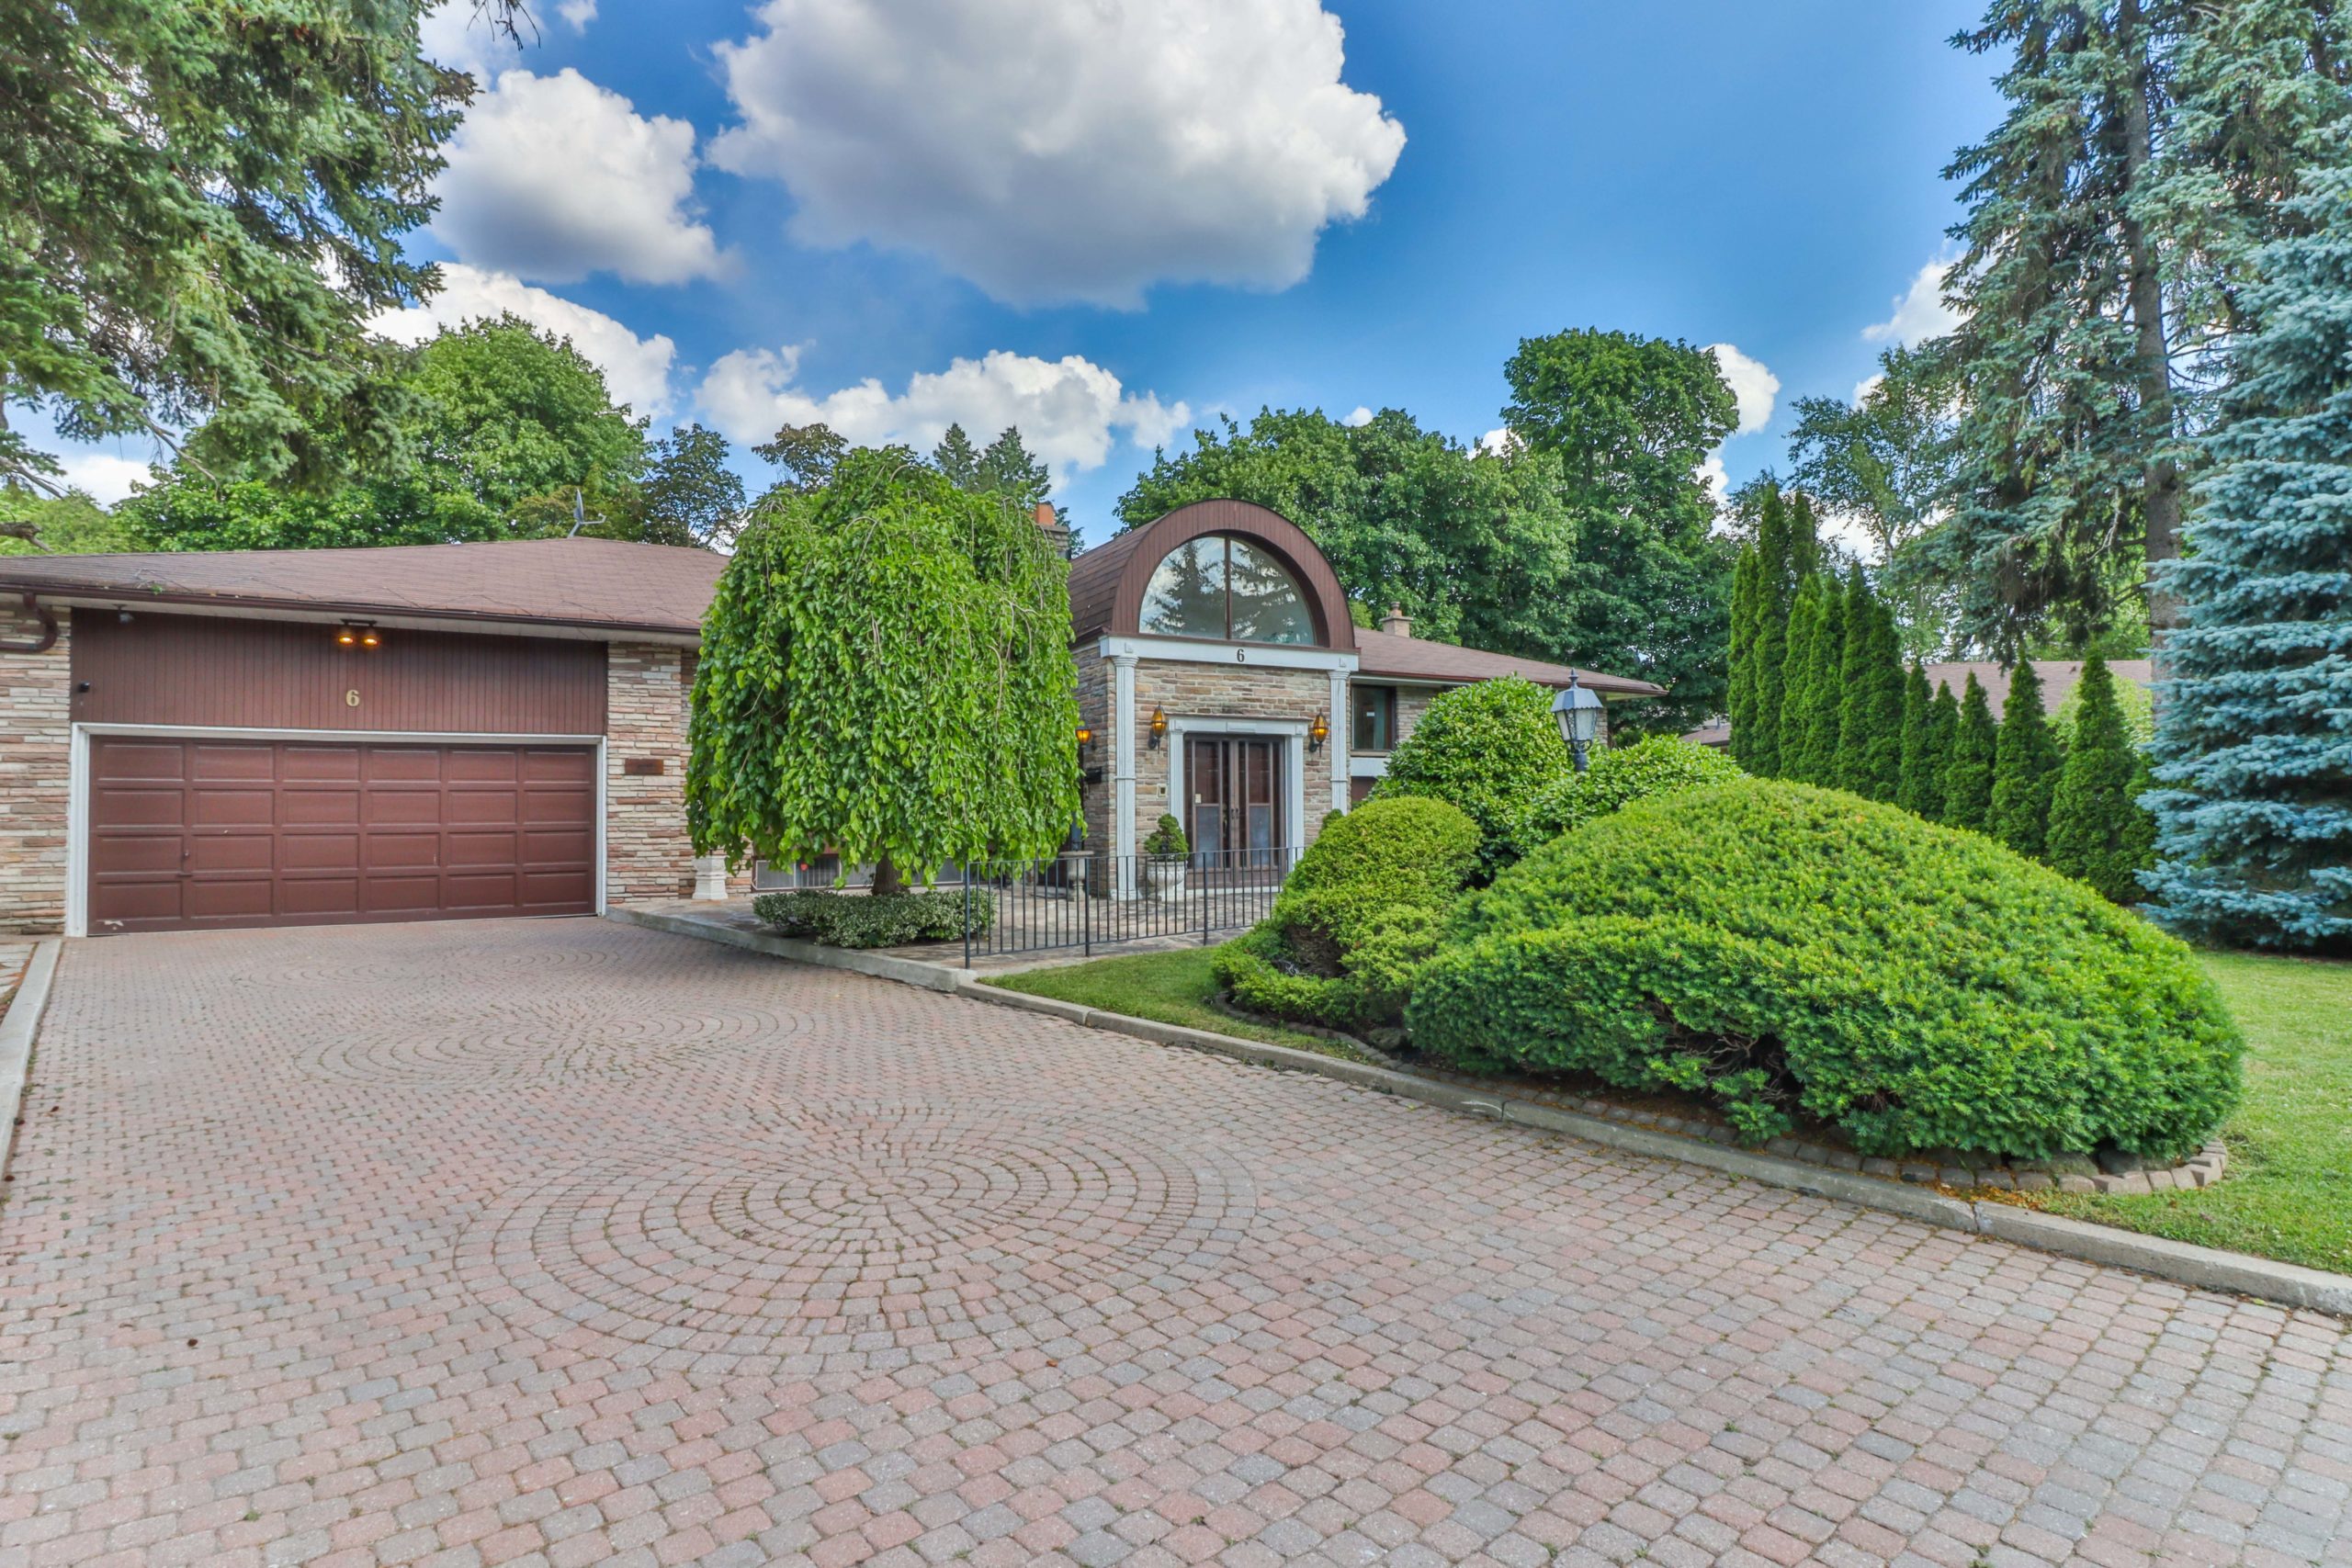 Photo of 6 parmbelle cres, a house with big driveway.